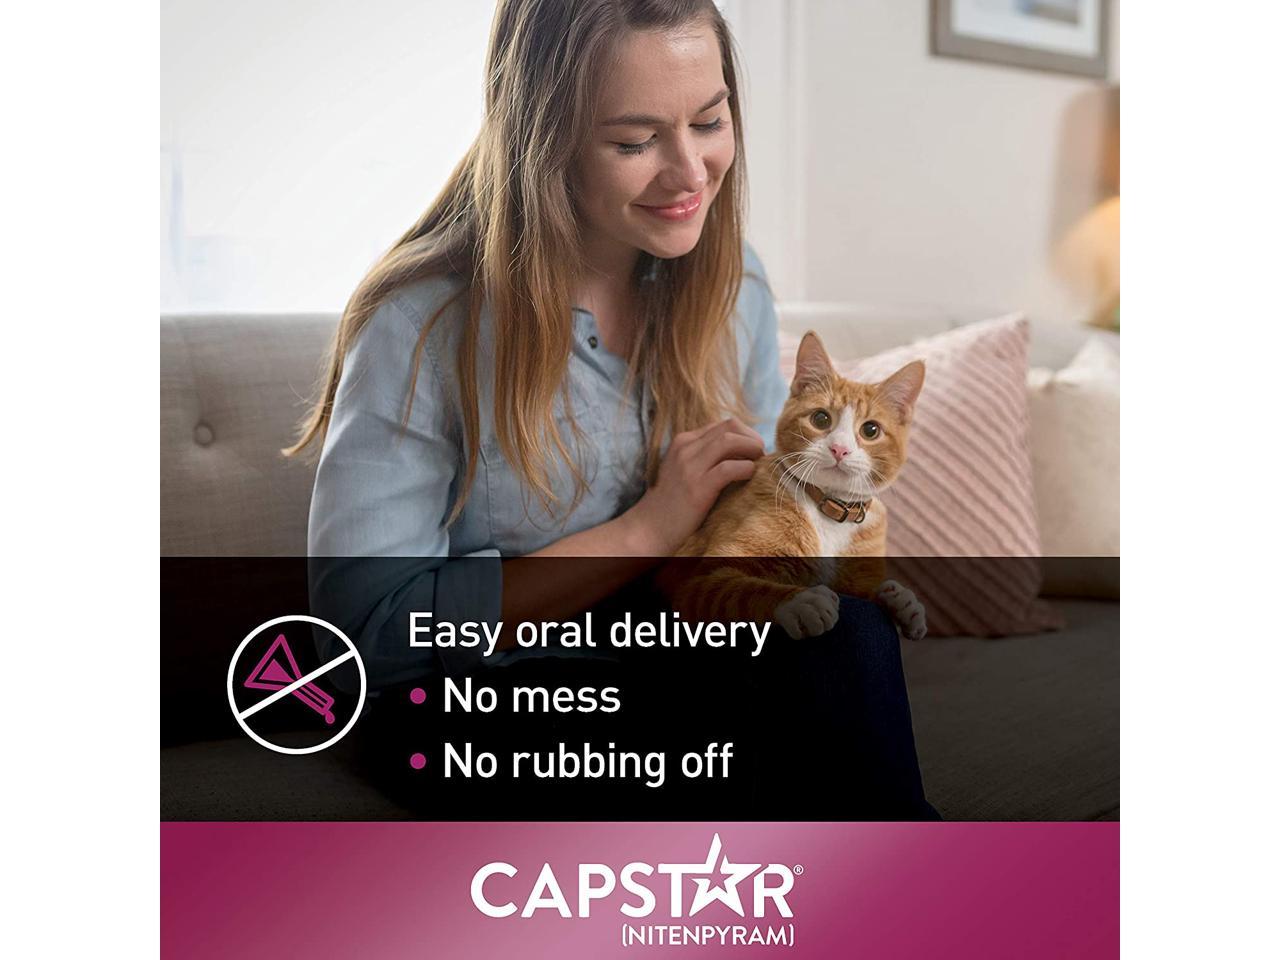 does the capster it prevent fleas